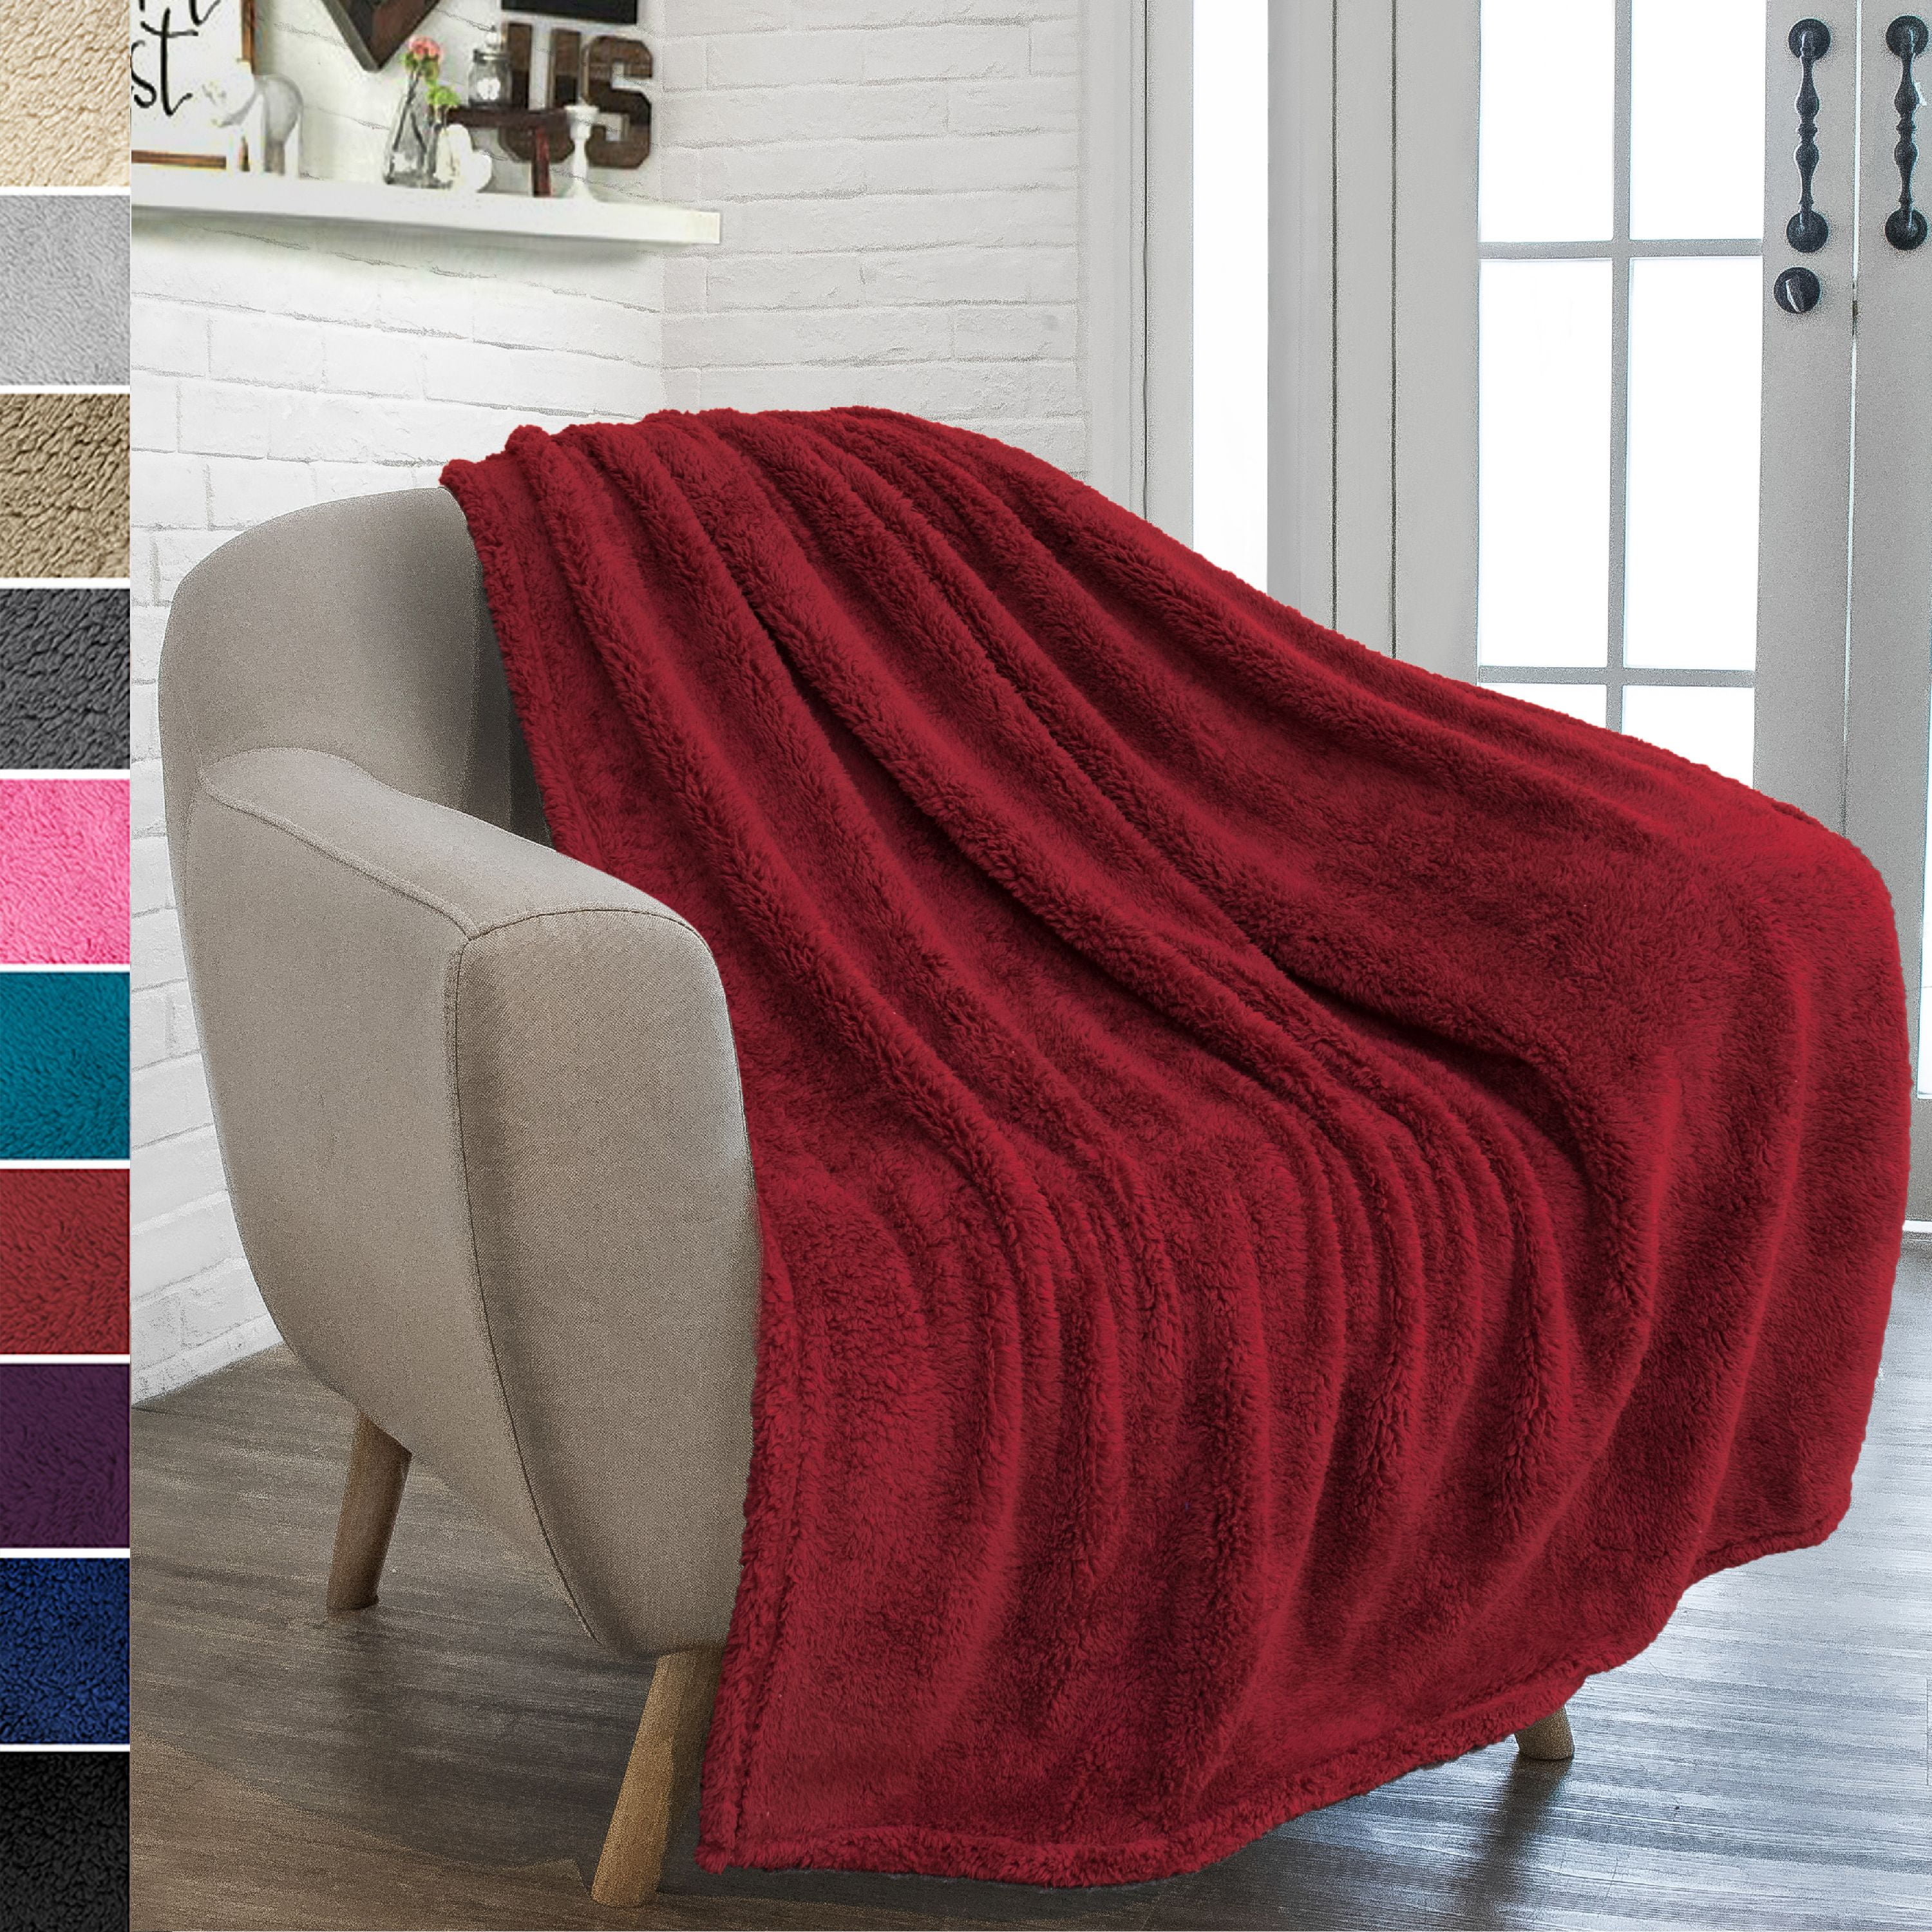 Others Borderlands-Cloud Ultra Soft Blanket Throw Thick Blanket All Season Premium Fluffy Microfiber Fleece Throw for Sofa Couch Bed